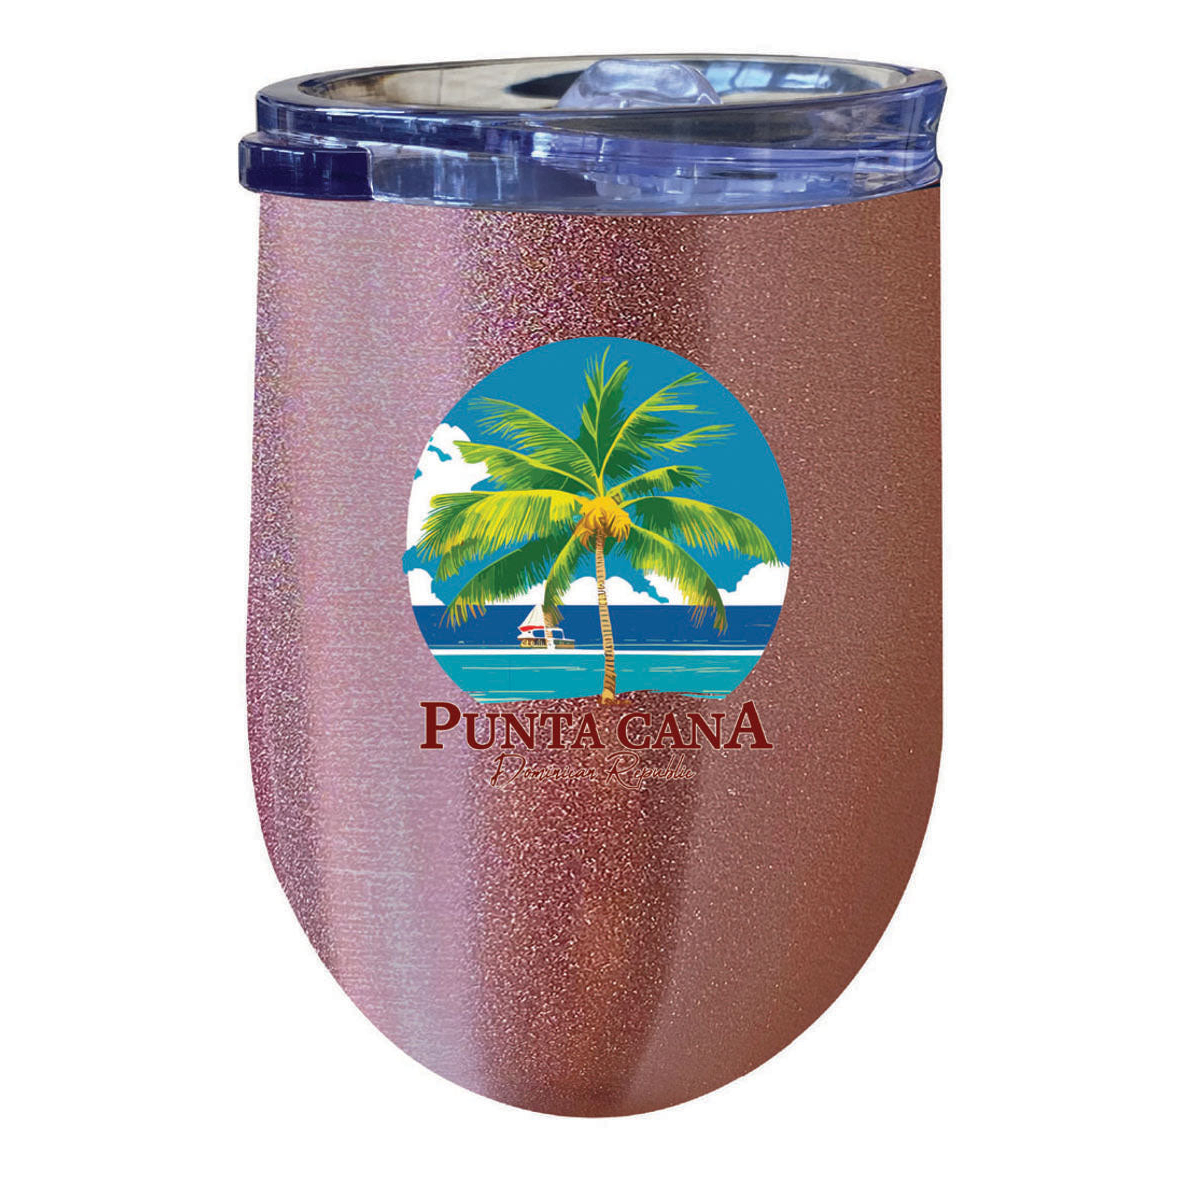 Punta Cana Dominican Republic Souvenir 12 Oz Insulated Wine Stainless Steel Tumbler - Navy, PARROT B